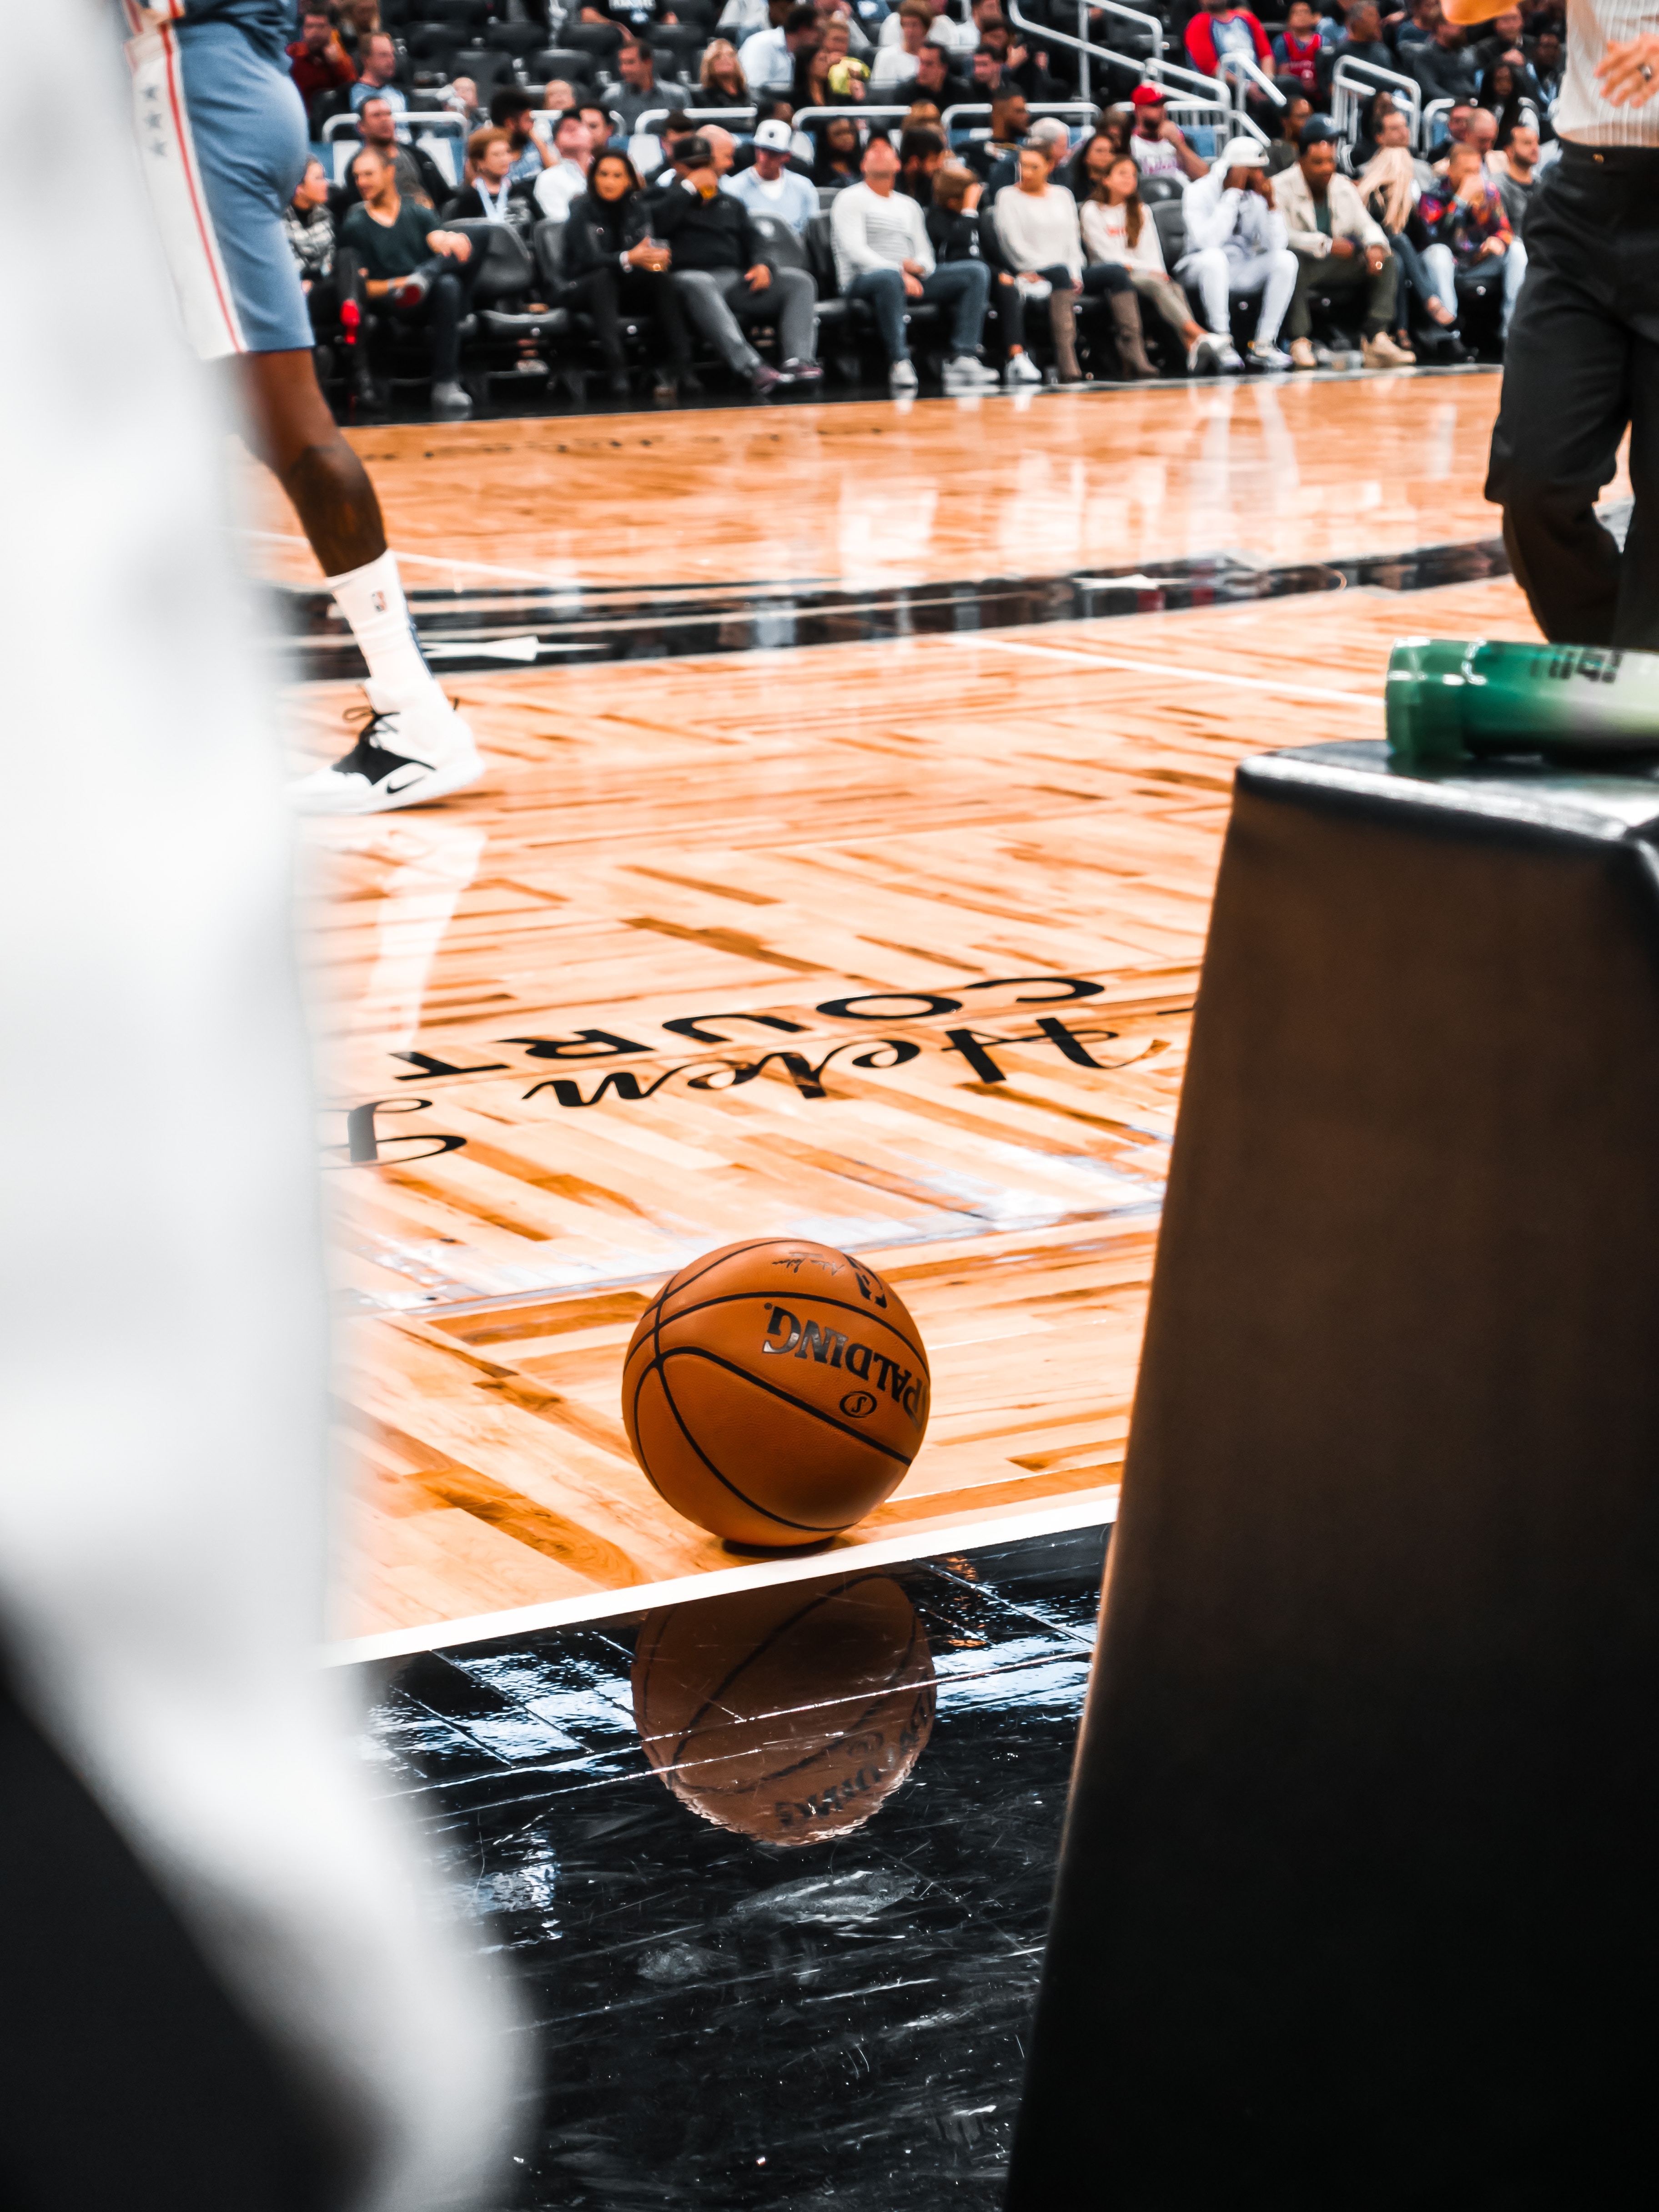 The basketball of a game at the Orlando Magics home court, the Amway Center in Orlando, Florida.